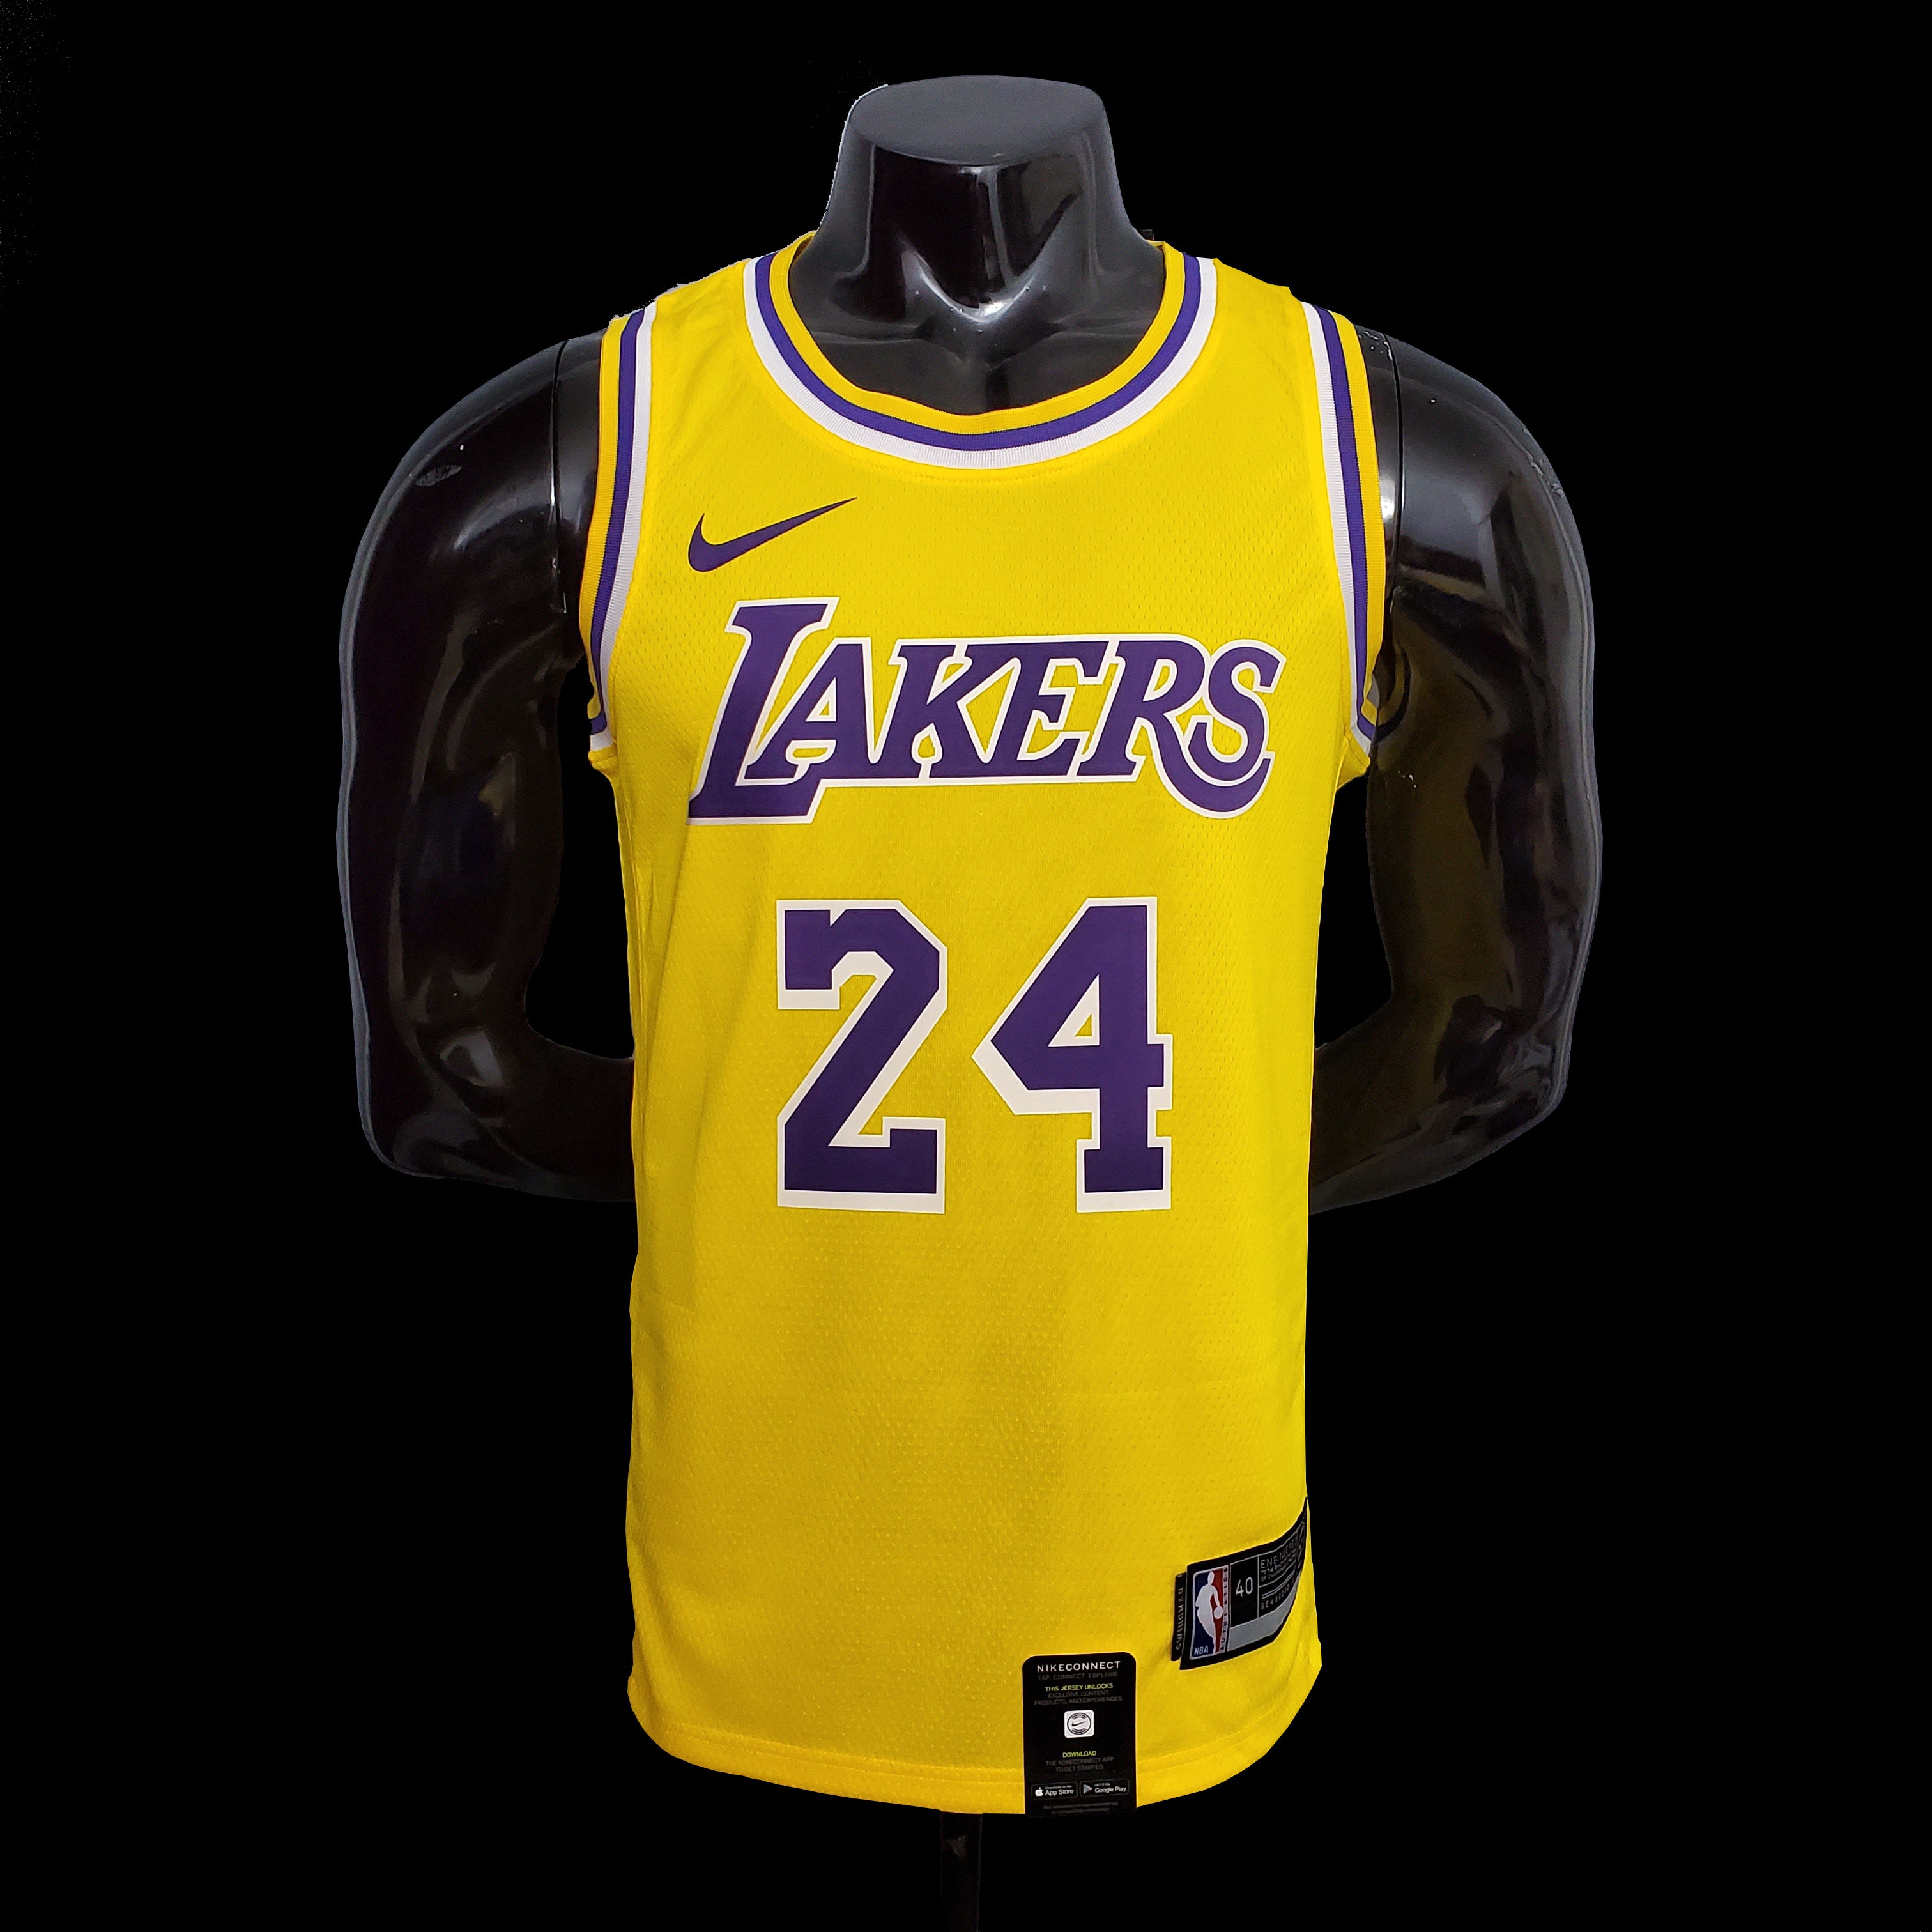 lakers jersey 24 bryant